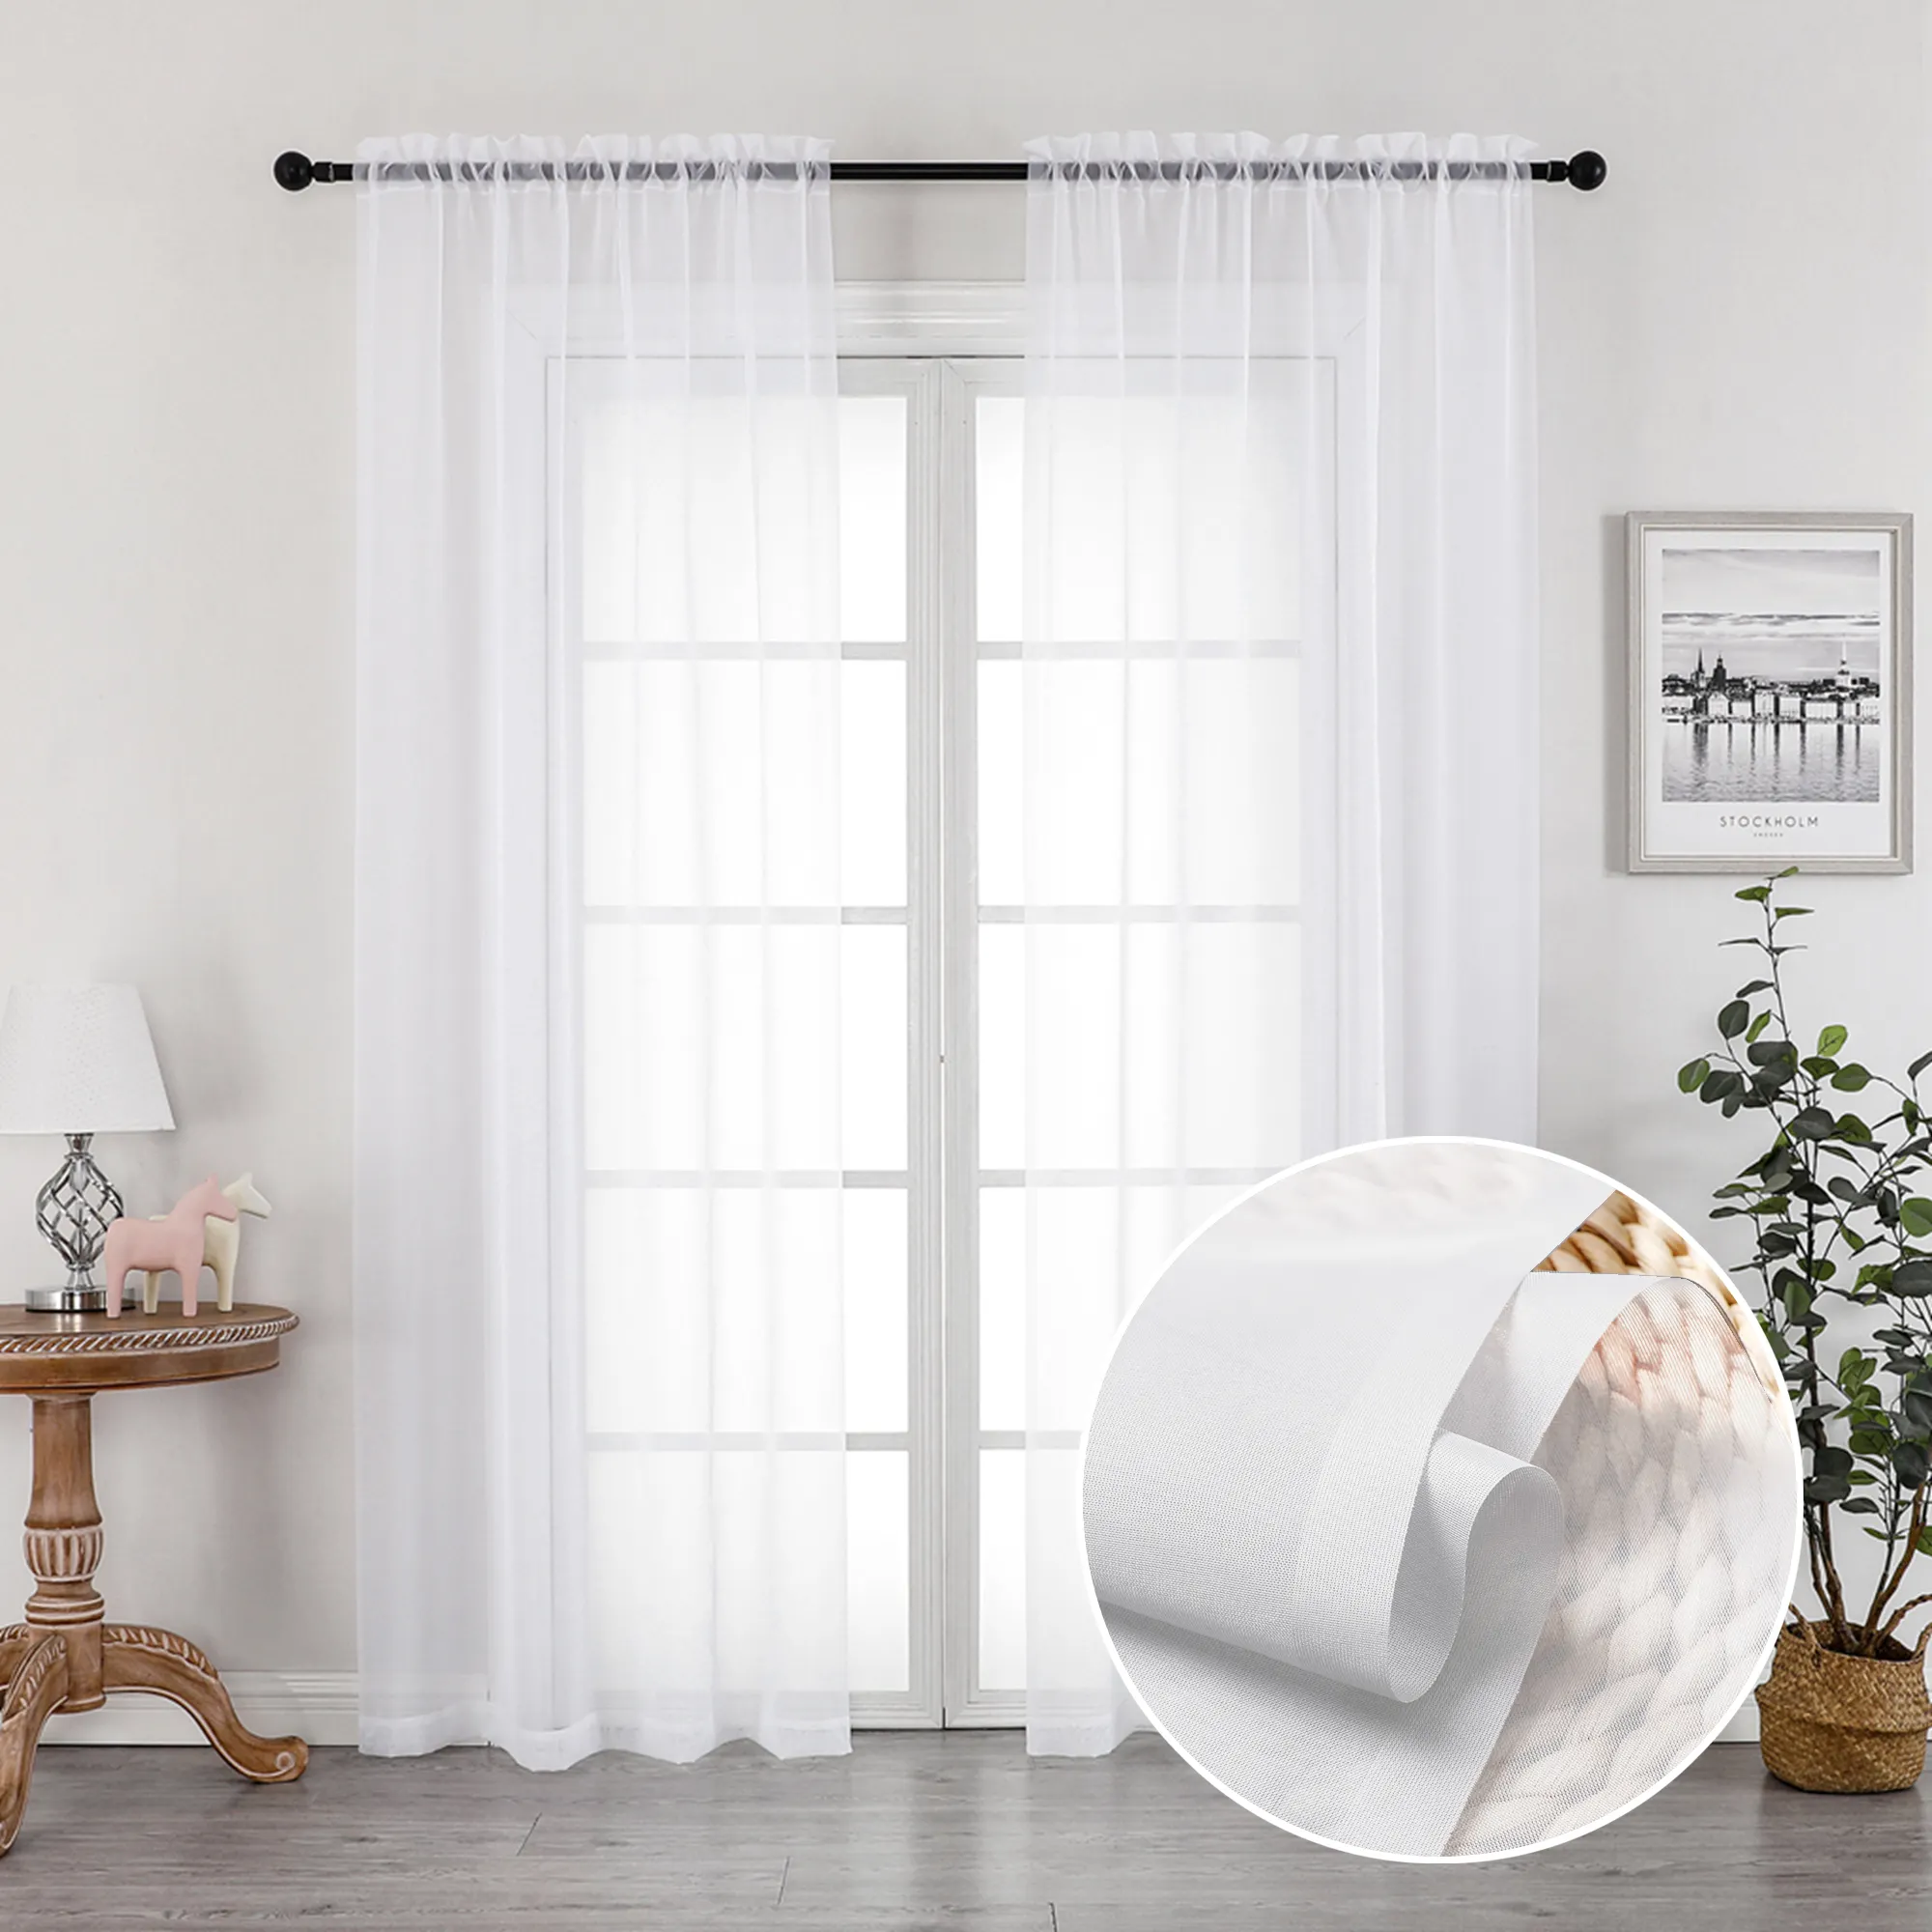 USA Hot Sell OWENIE More Colors Choice Curtains Set of 4 Transparent Sheer Curtains and Drapes for Living Room